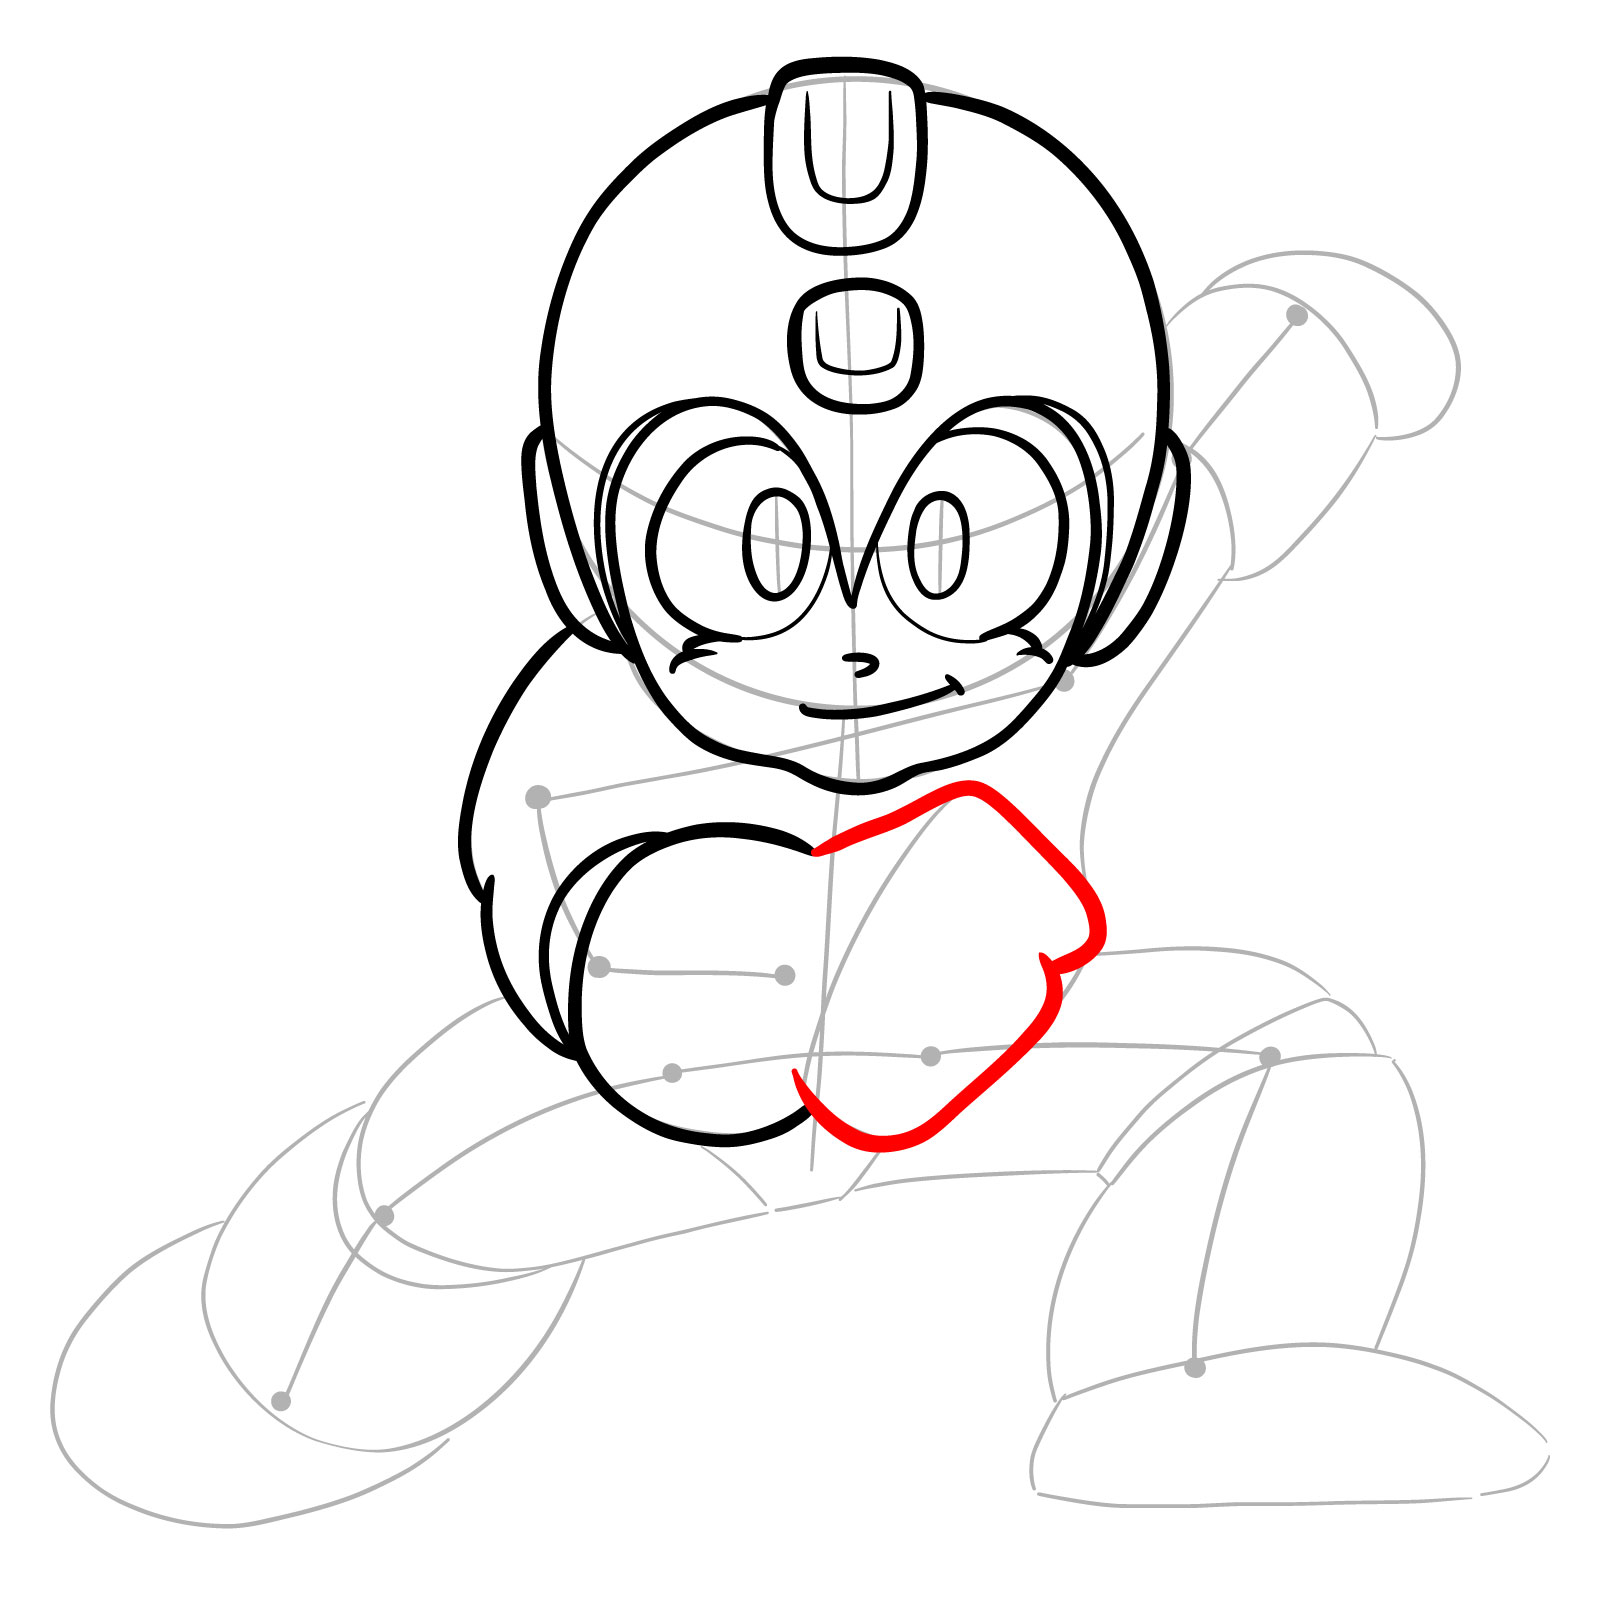 How to draw Mega Man from the original game - step 13